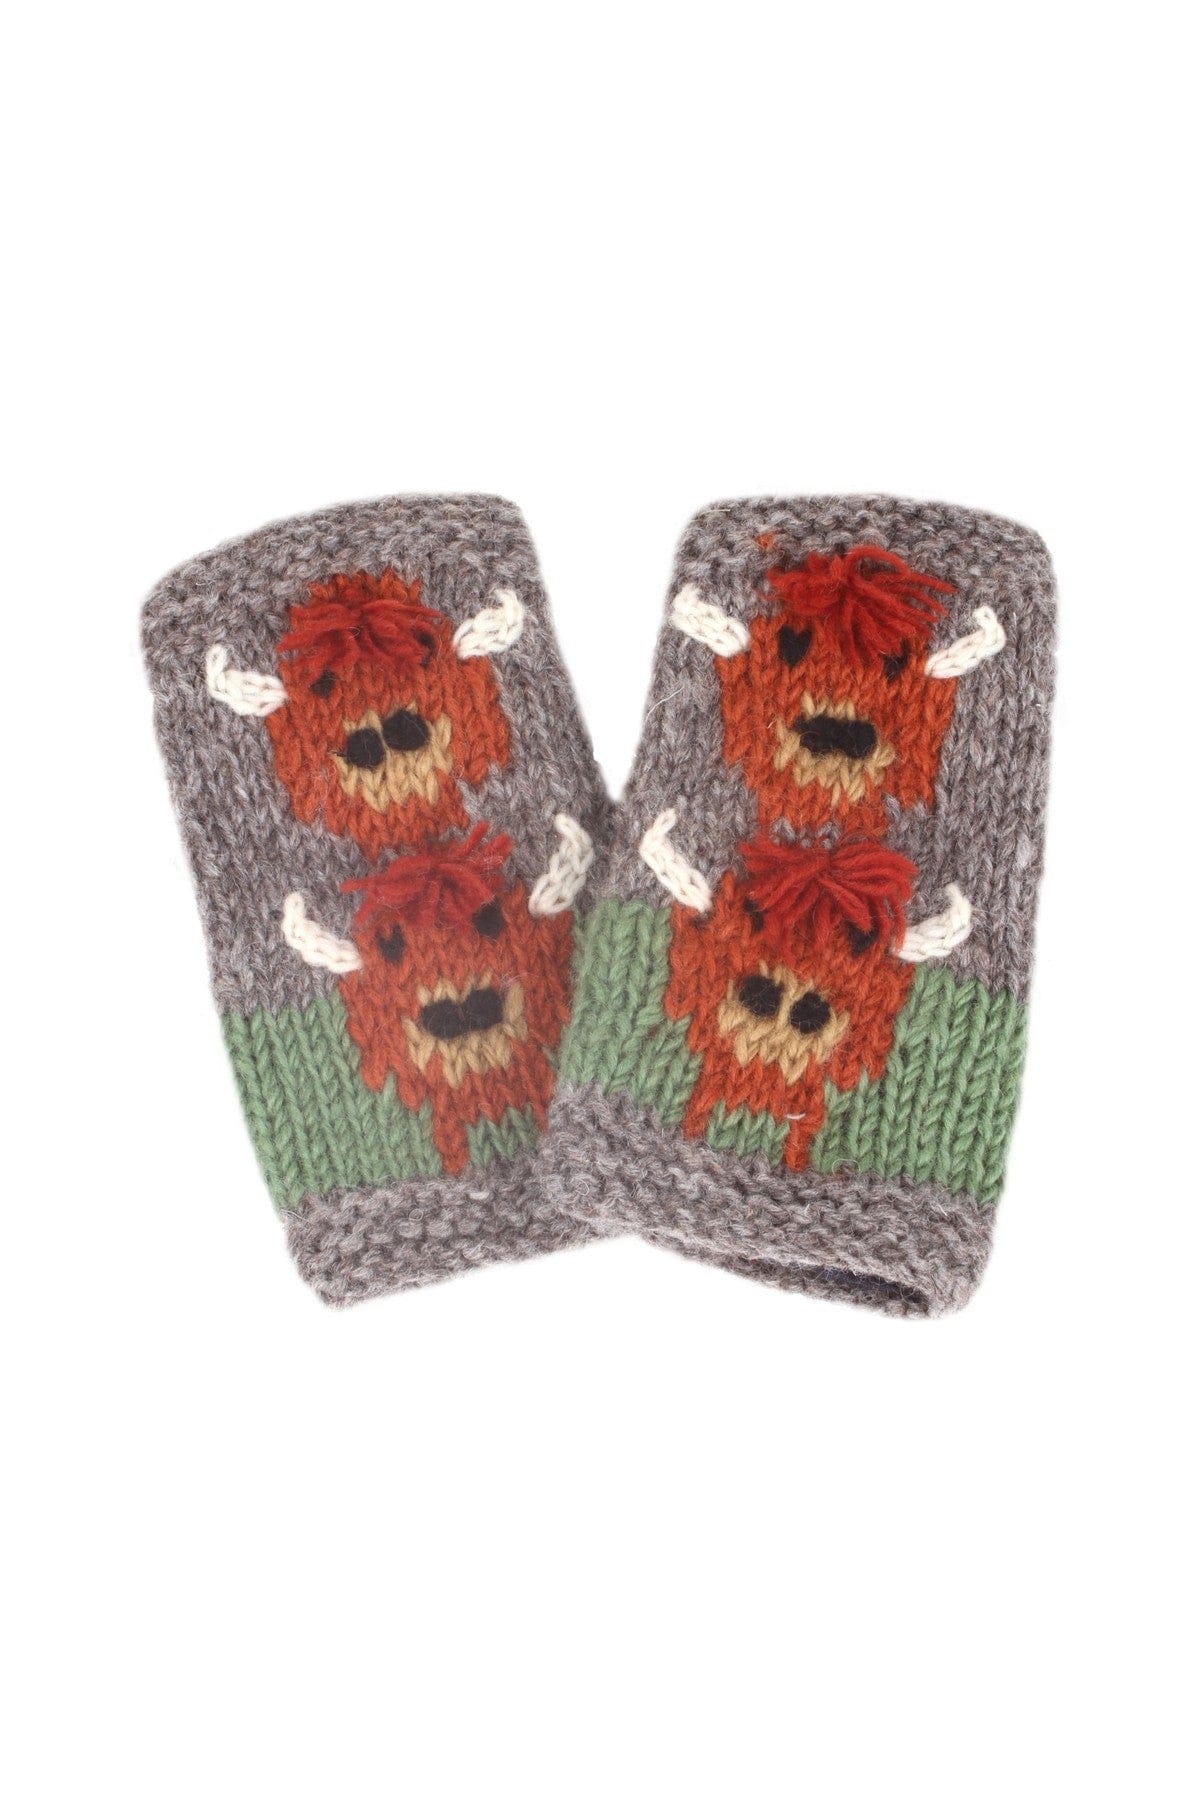 lusciousscarves Hats Pachamama Herd Of Highland Cow Hand Warmer